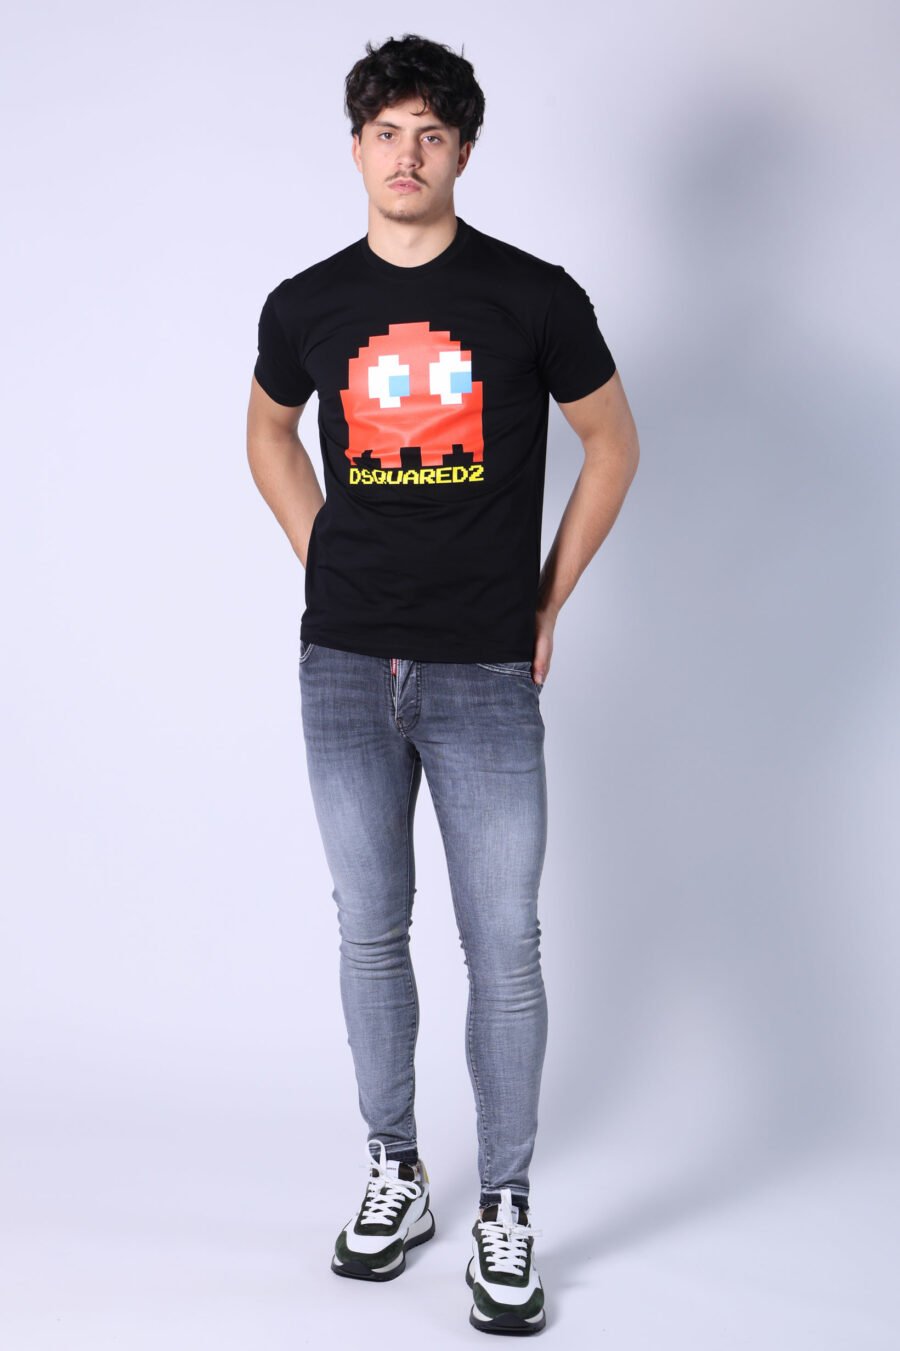 Black t-shirt with "pac-man" ghost maxi logo - Untitled Catalog 05639